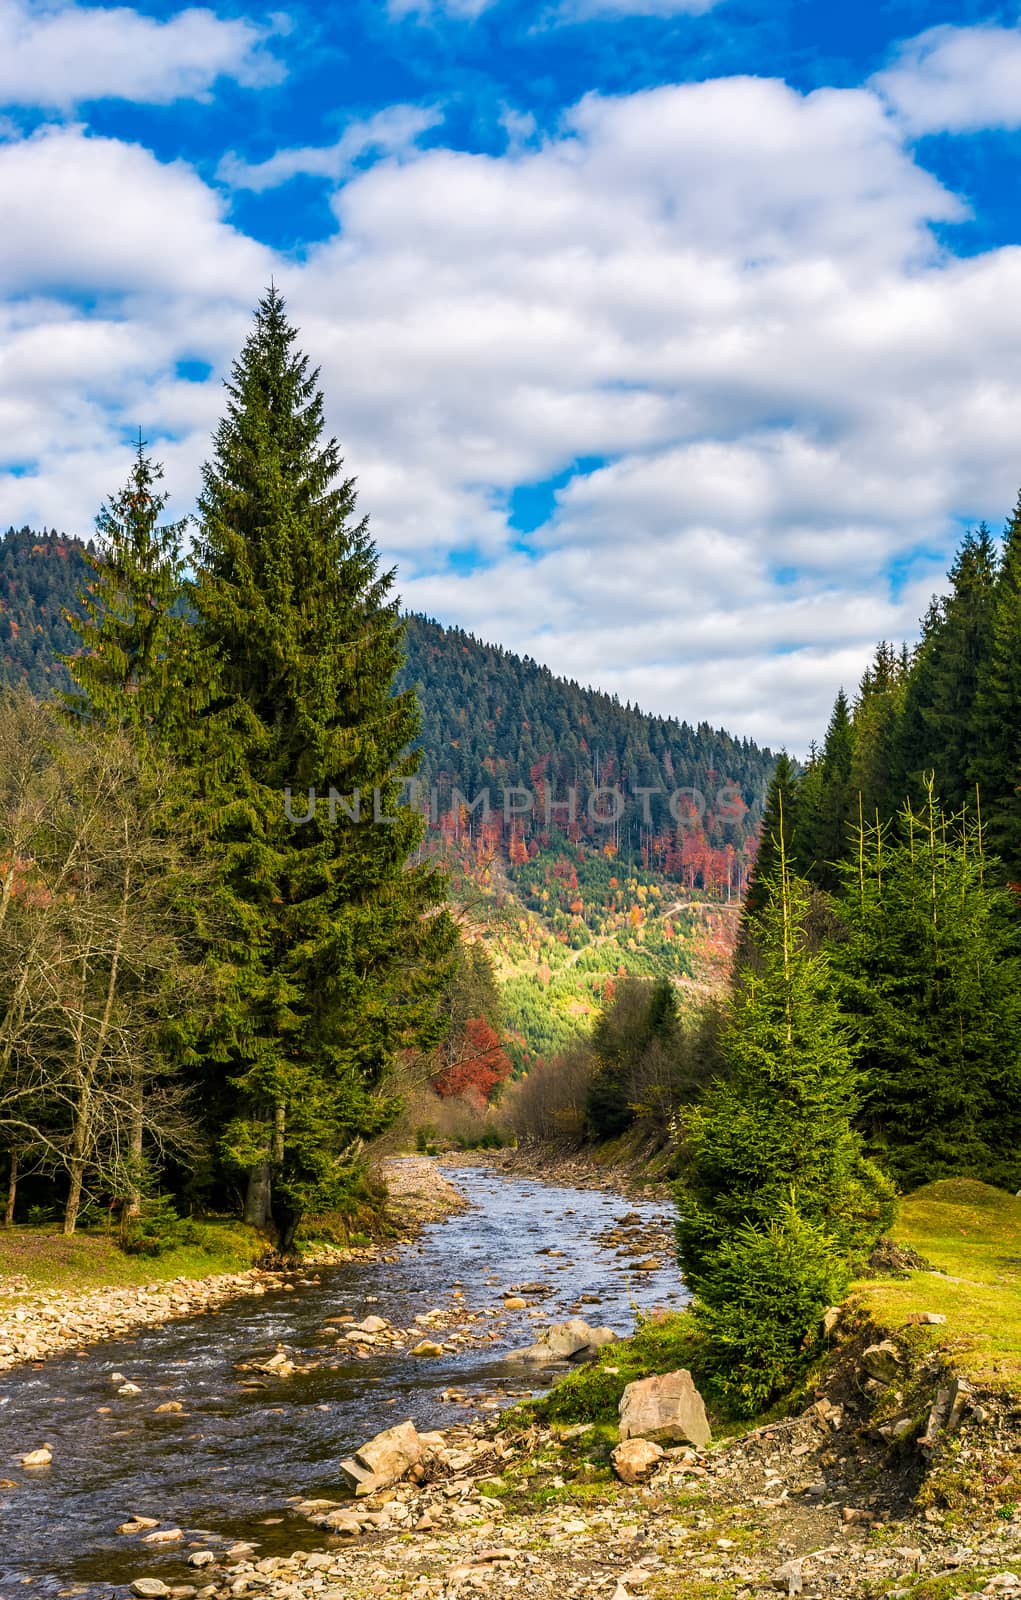 autumnal landscape with narrow river in spruce forest. beautiful nature scenery mountainous area under blue sky with clouds